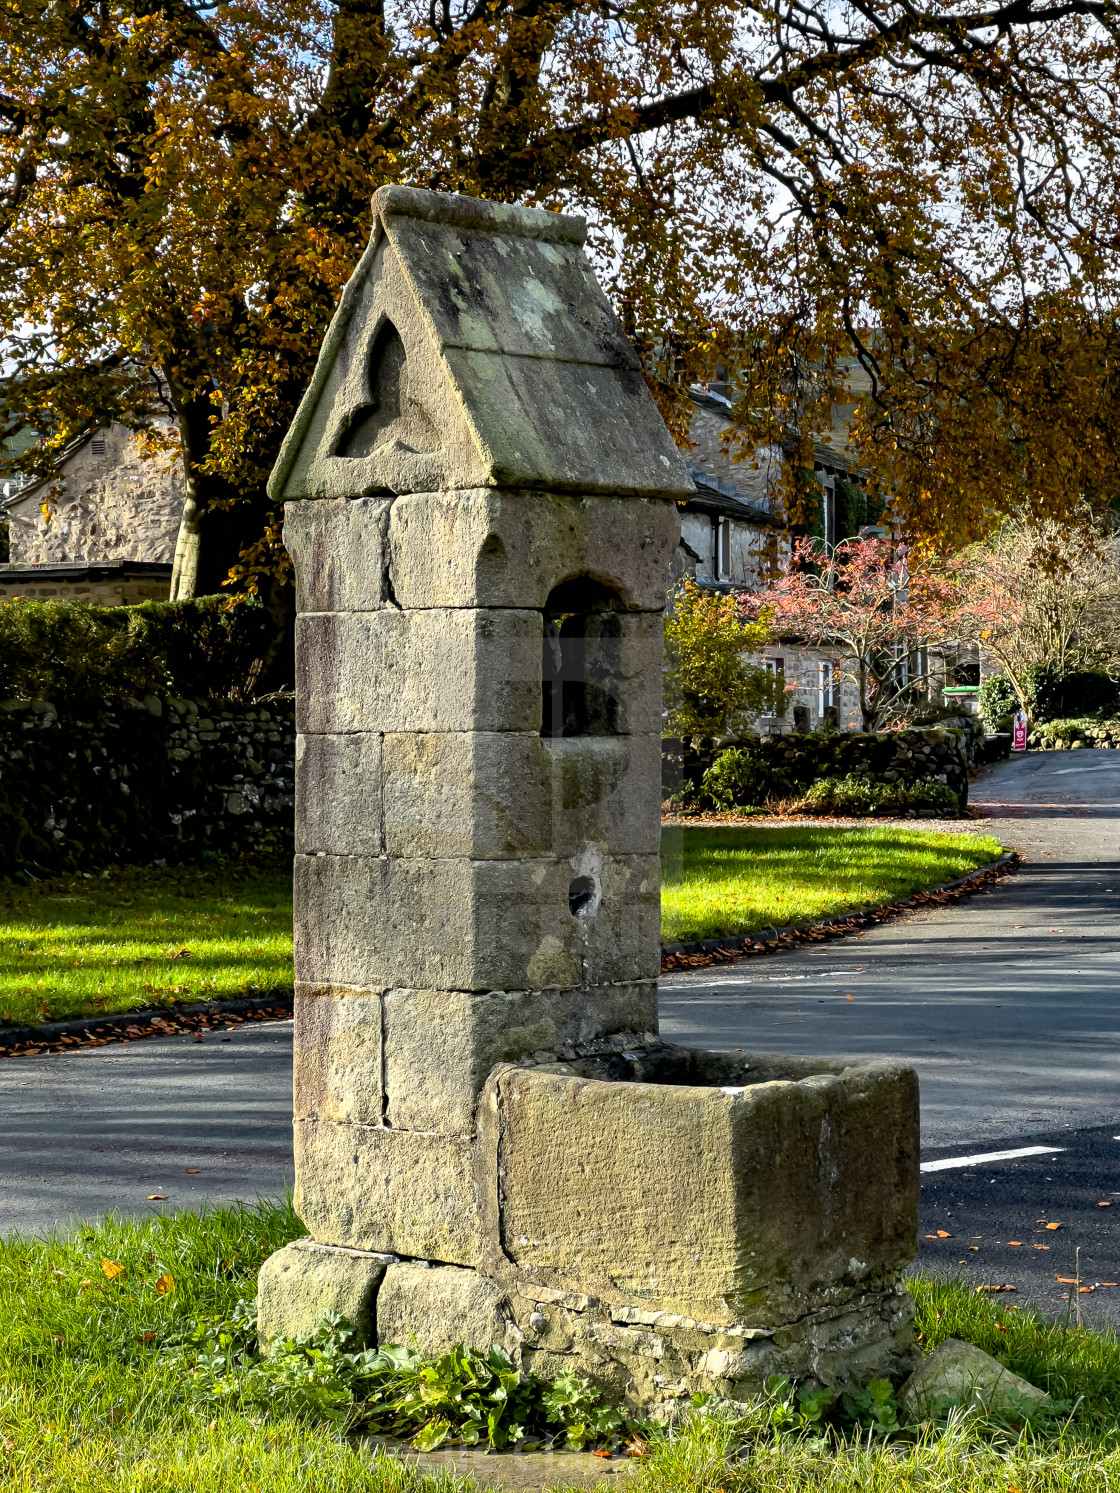 "Arncliffe Water Pump and Village Green" stock image